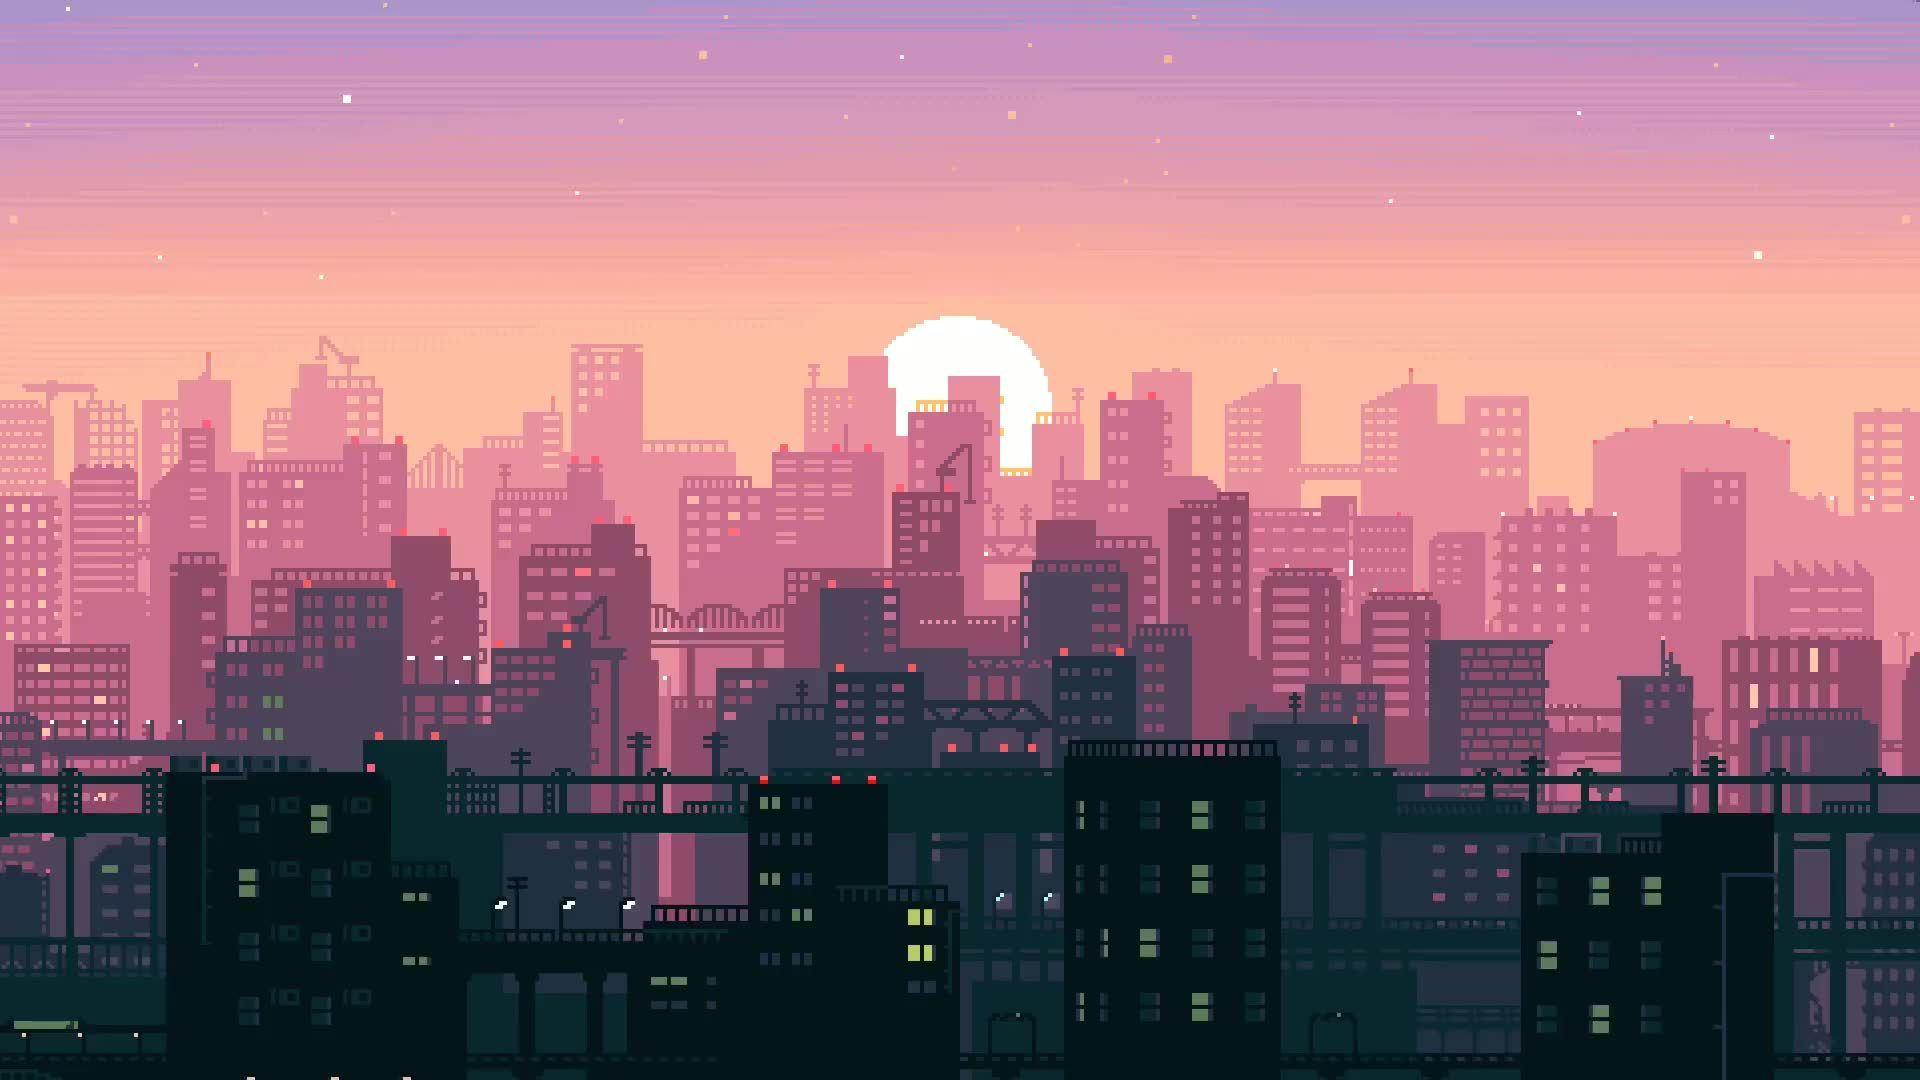 Aesthetic City Computer Wallpapers - Top Free Aesthetic ...